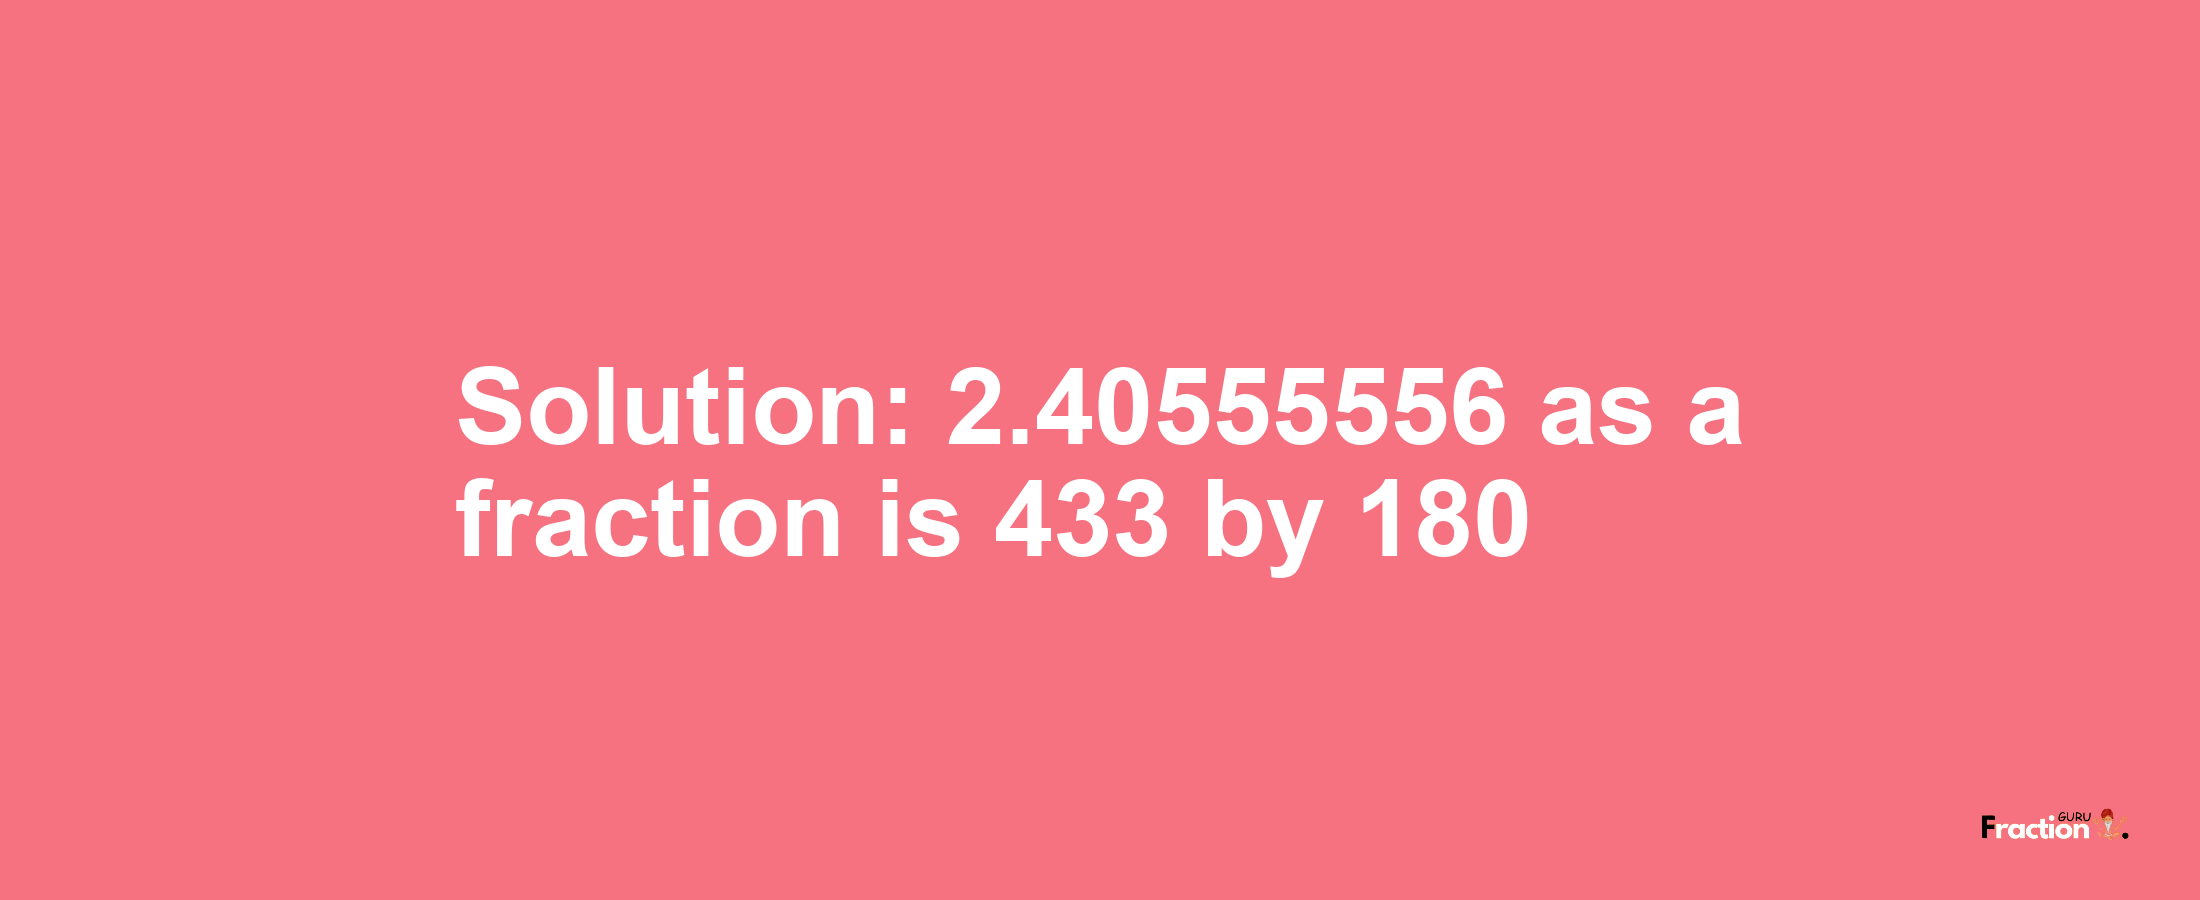 Solution:2.40555556 as a fraction is 433/180